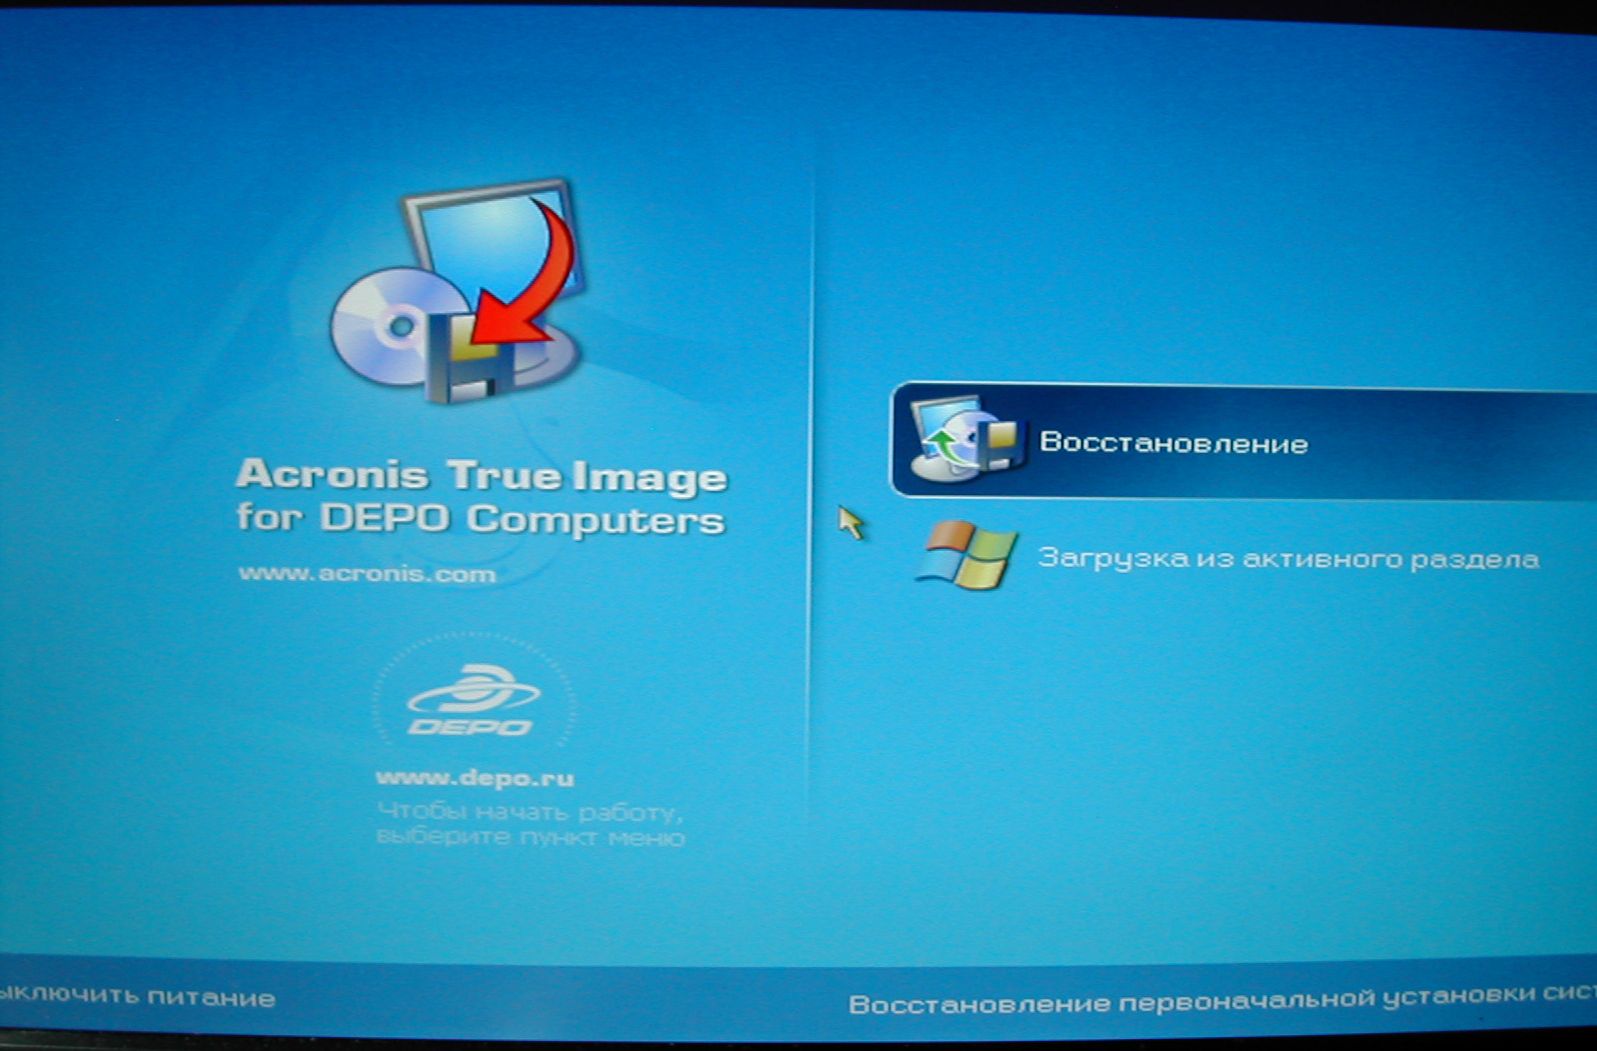 Acronis TRUE Image for DEPO Computers